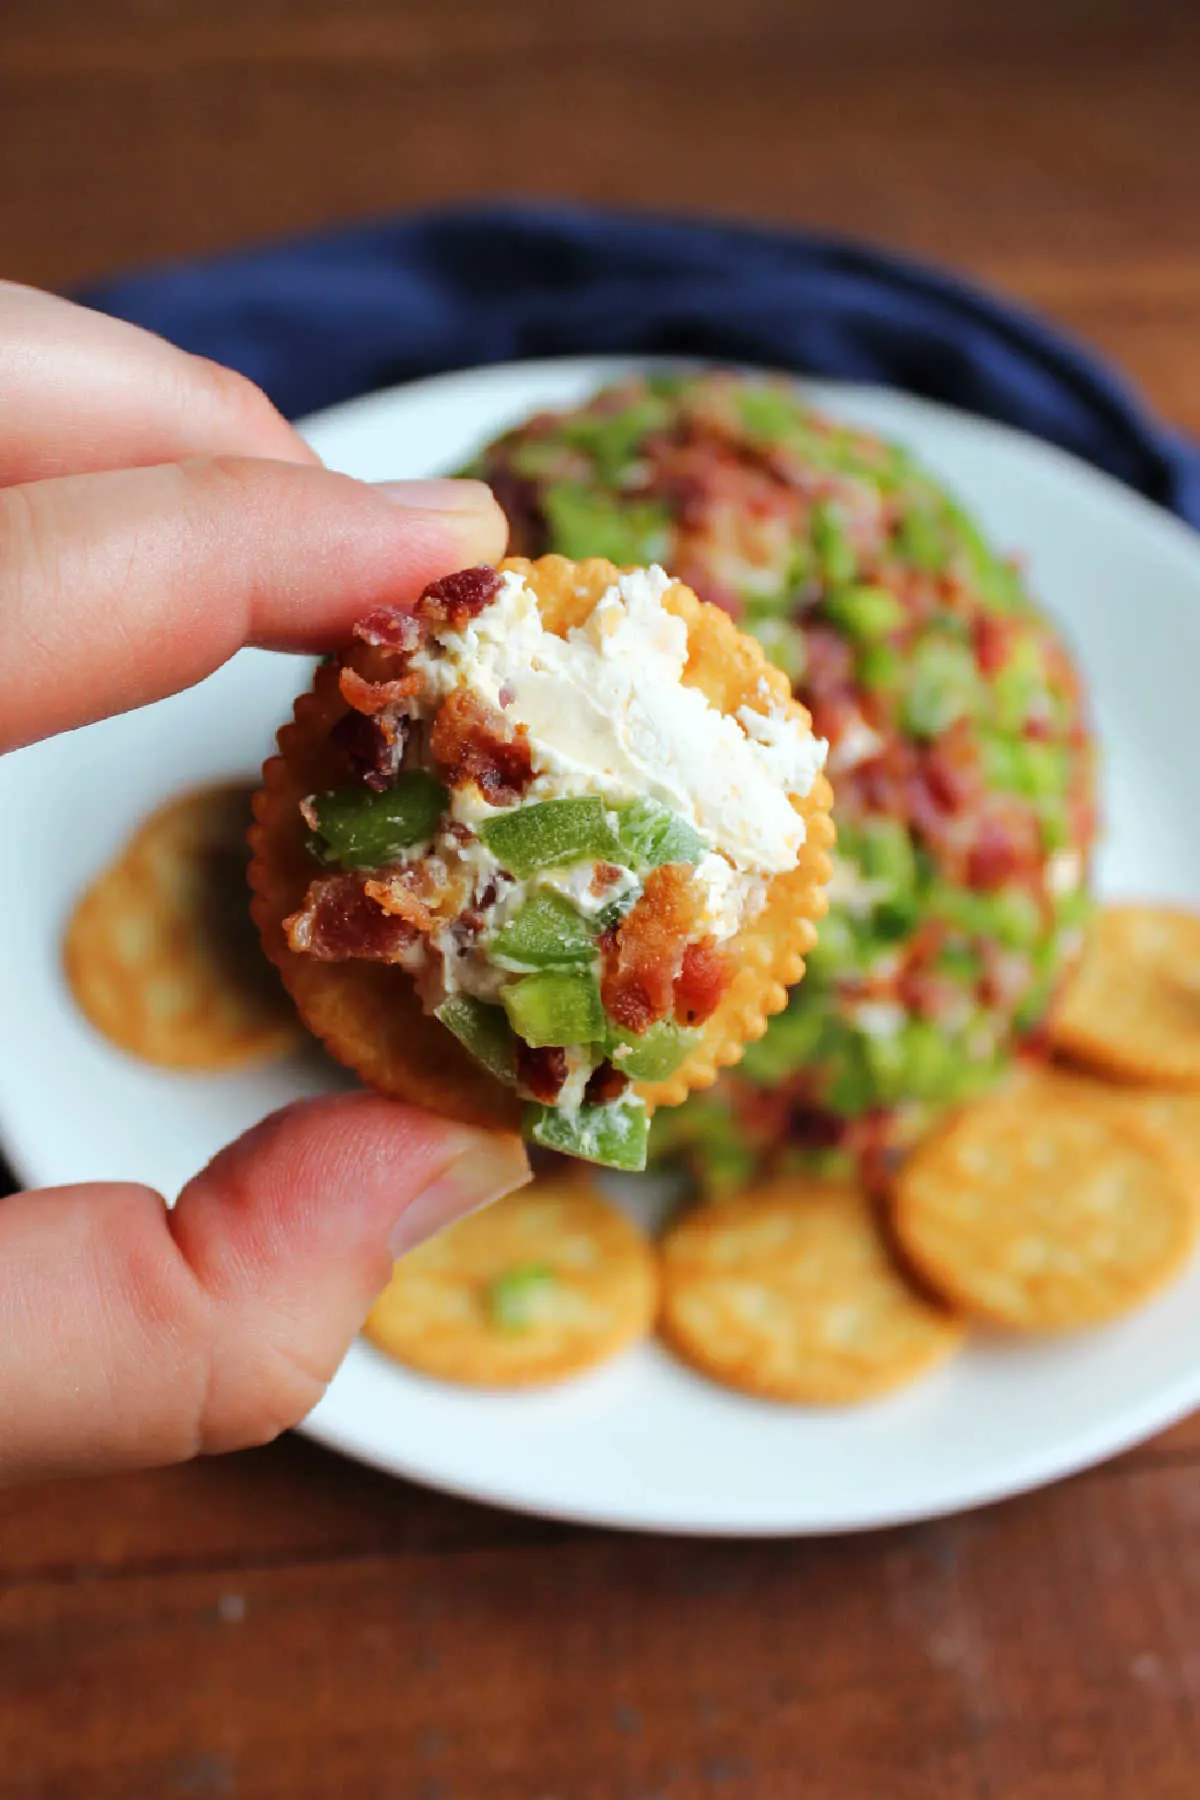 Hand holding cracker with bacon jalapeno cheese ball spread over the top.